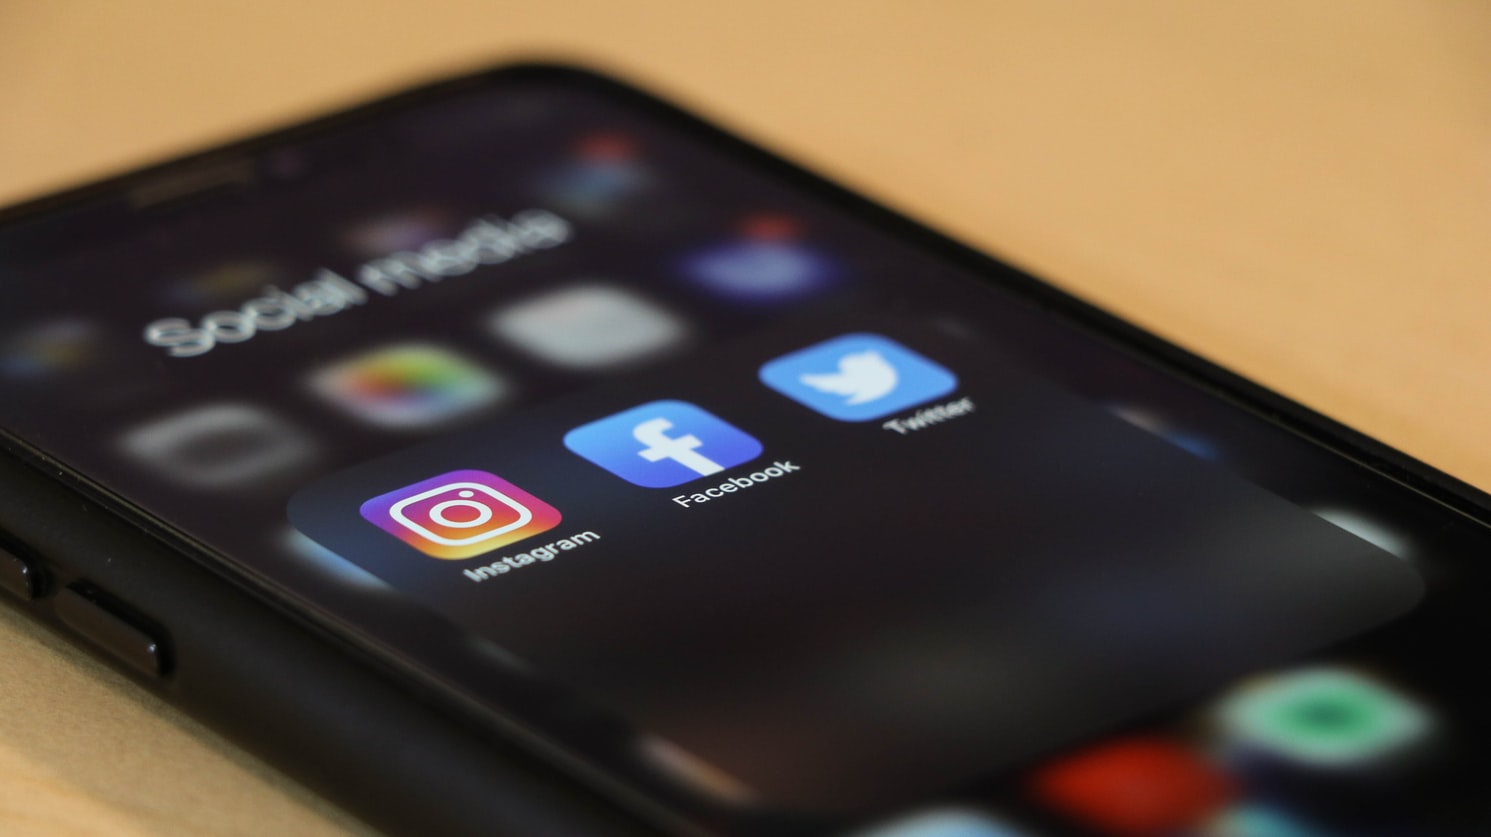 iPhone showing Instagram, Facebook, and Twitter apps